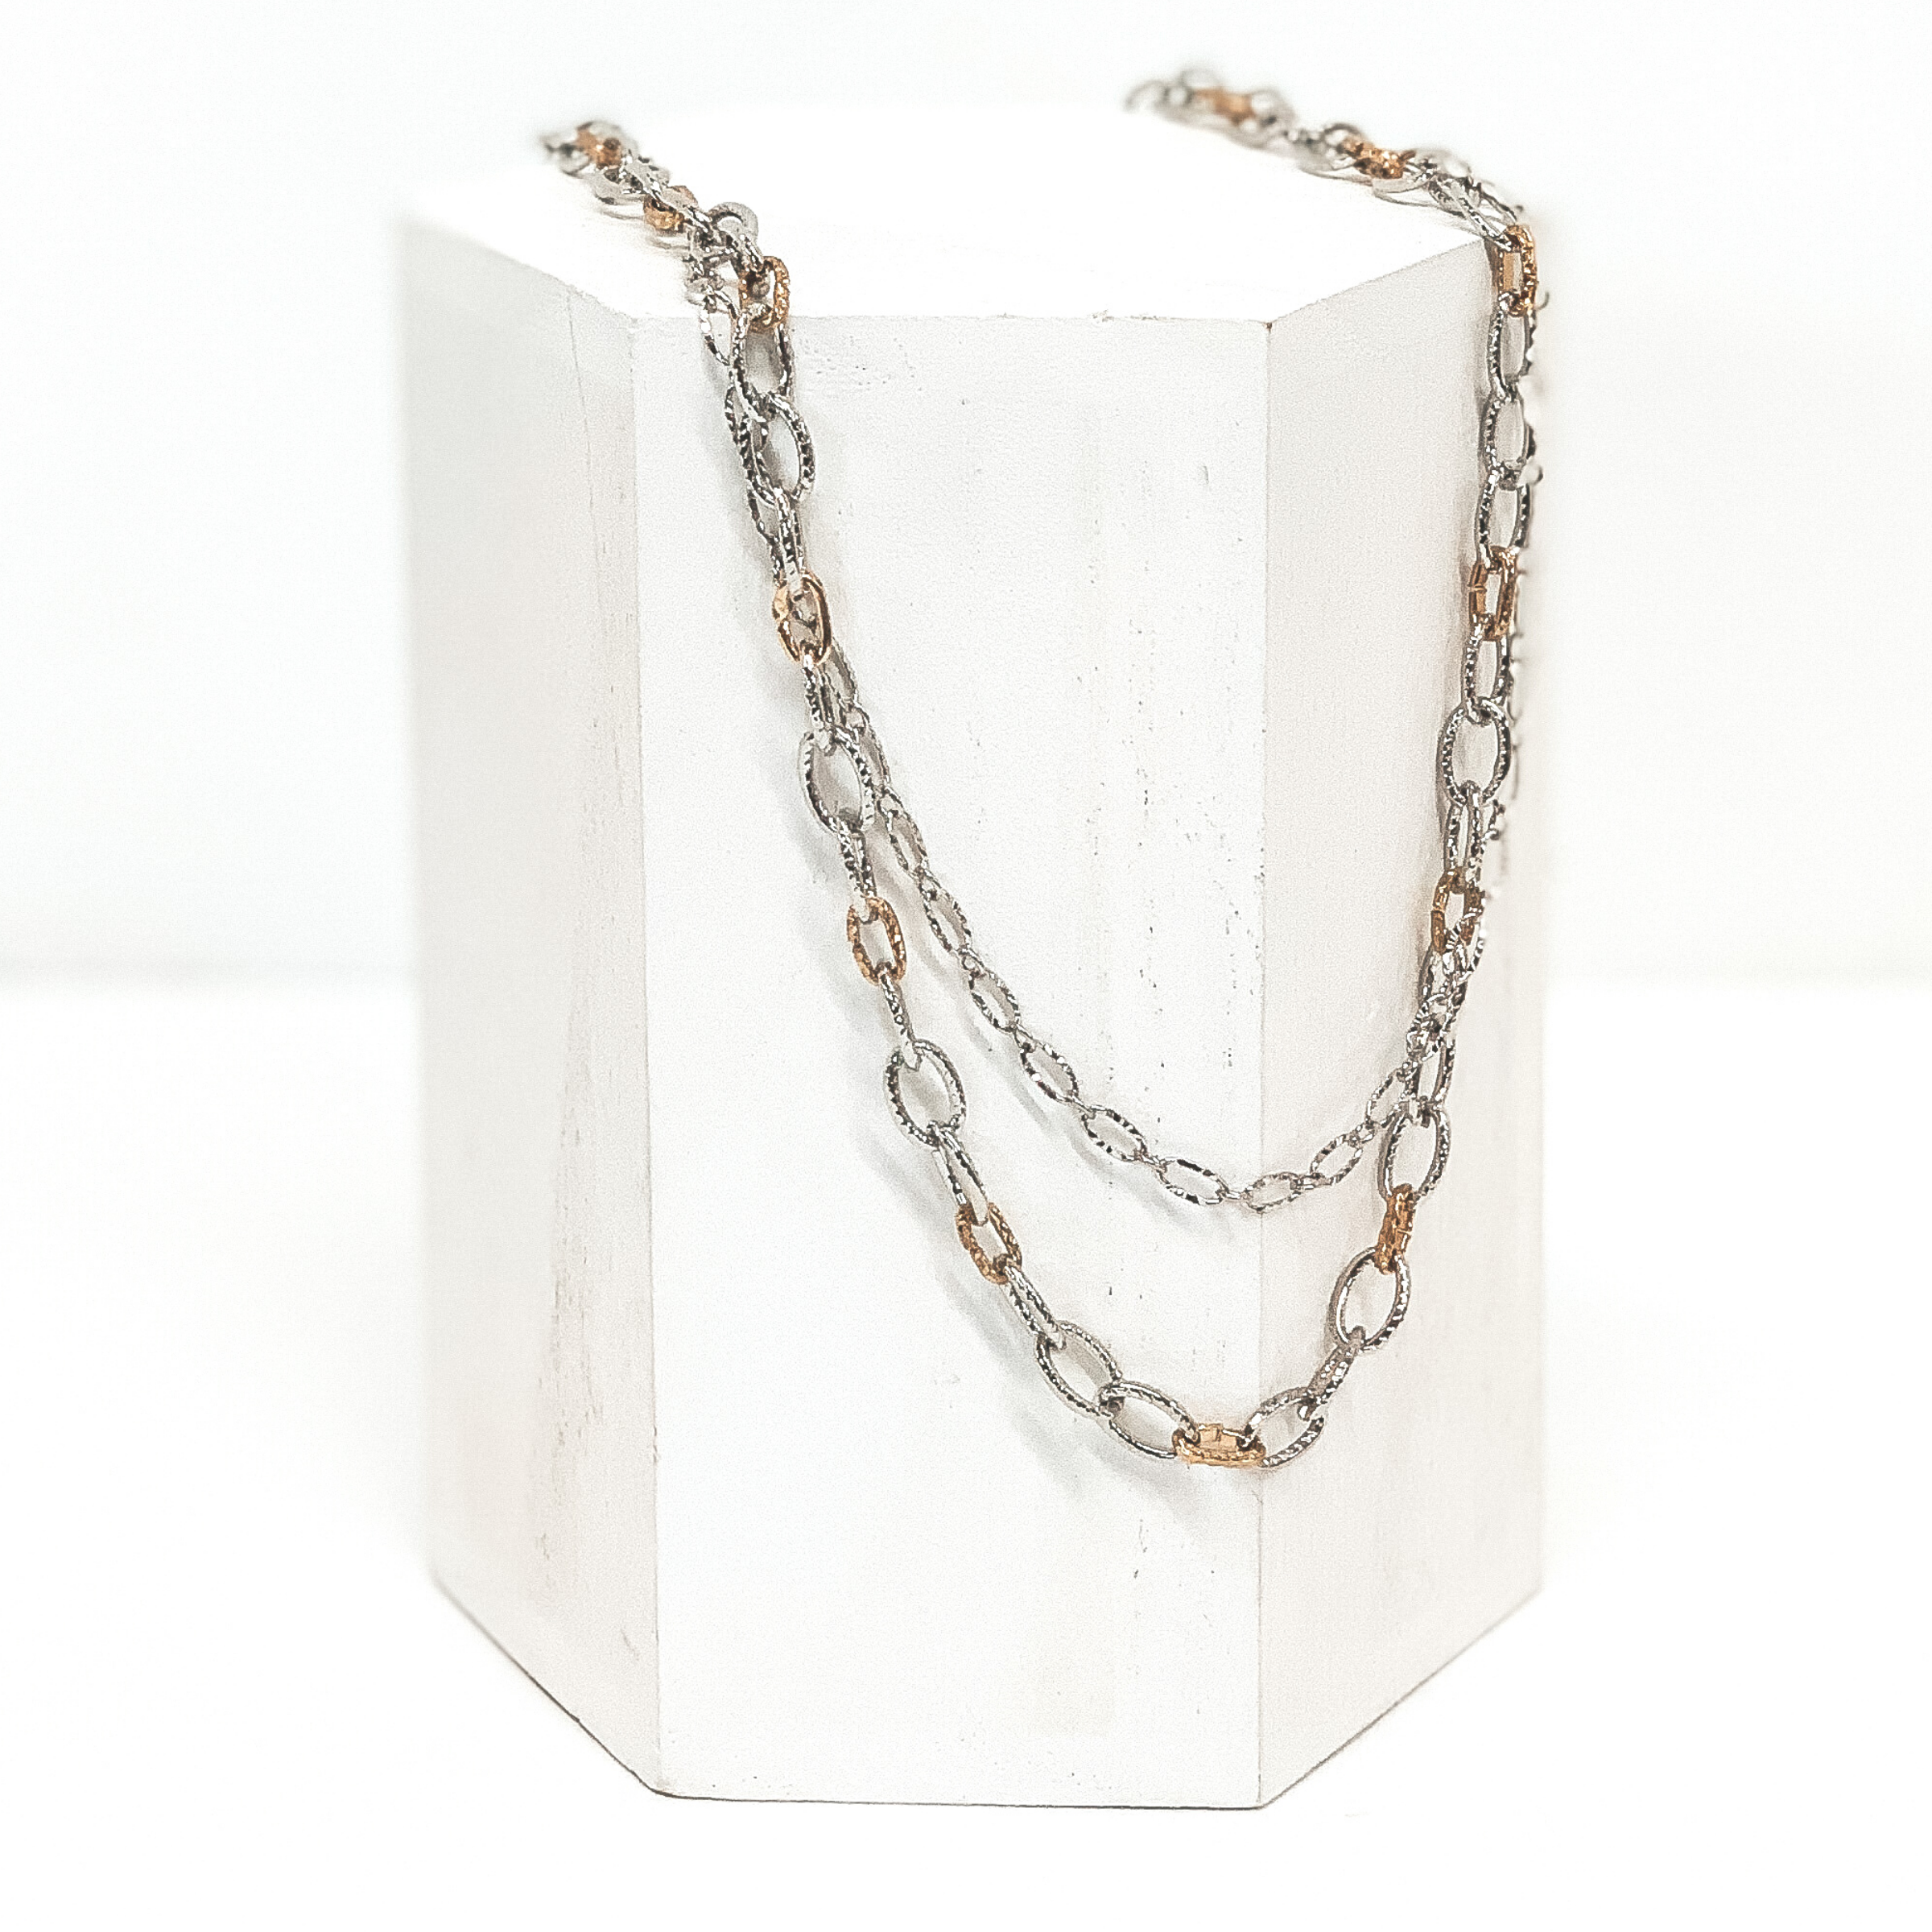 Two Strand Hammered Chain Link Necklace with Gold Spacers in Silver - Giddy Up Glamour Boutique